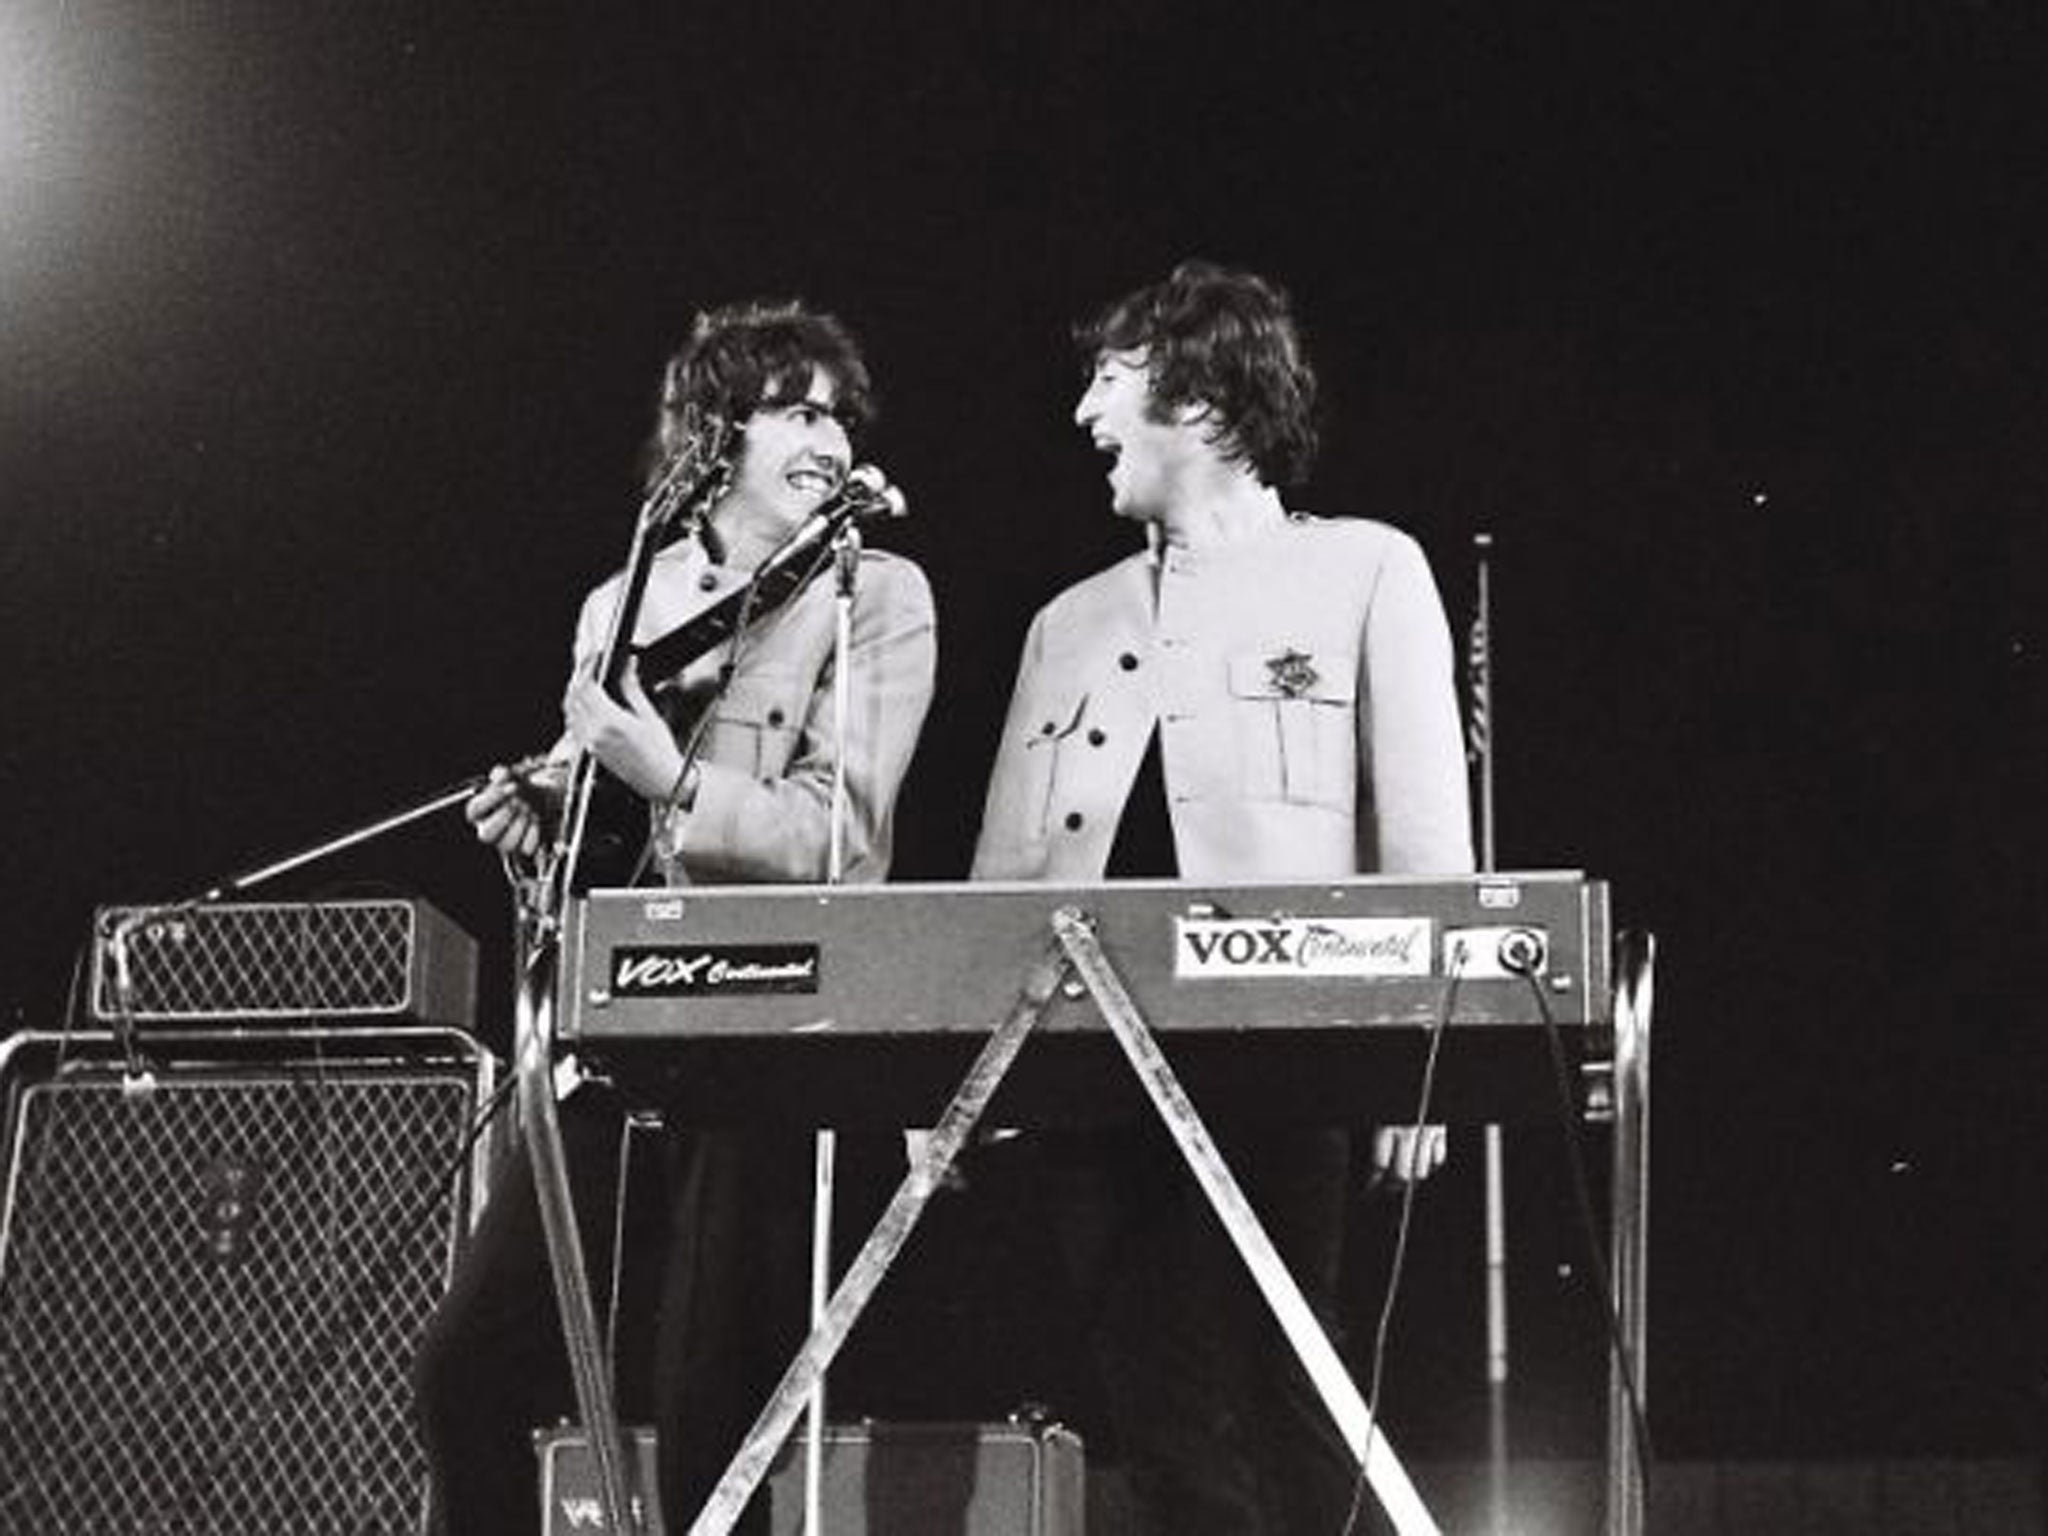 Handout photo issued by Omega Auctions of George Harrison (left) and John Lennon during The Beatles iconic Shea Stadium performance in August 1965 in New York